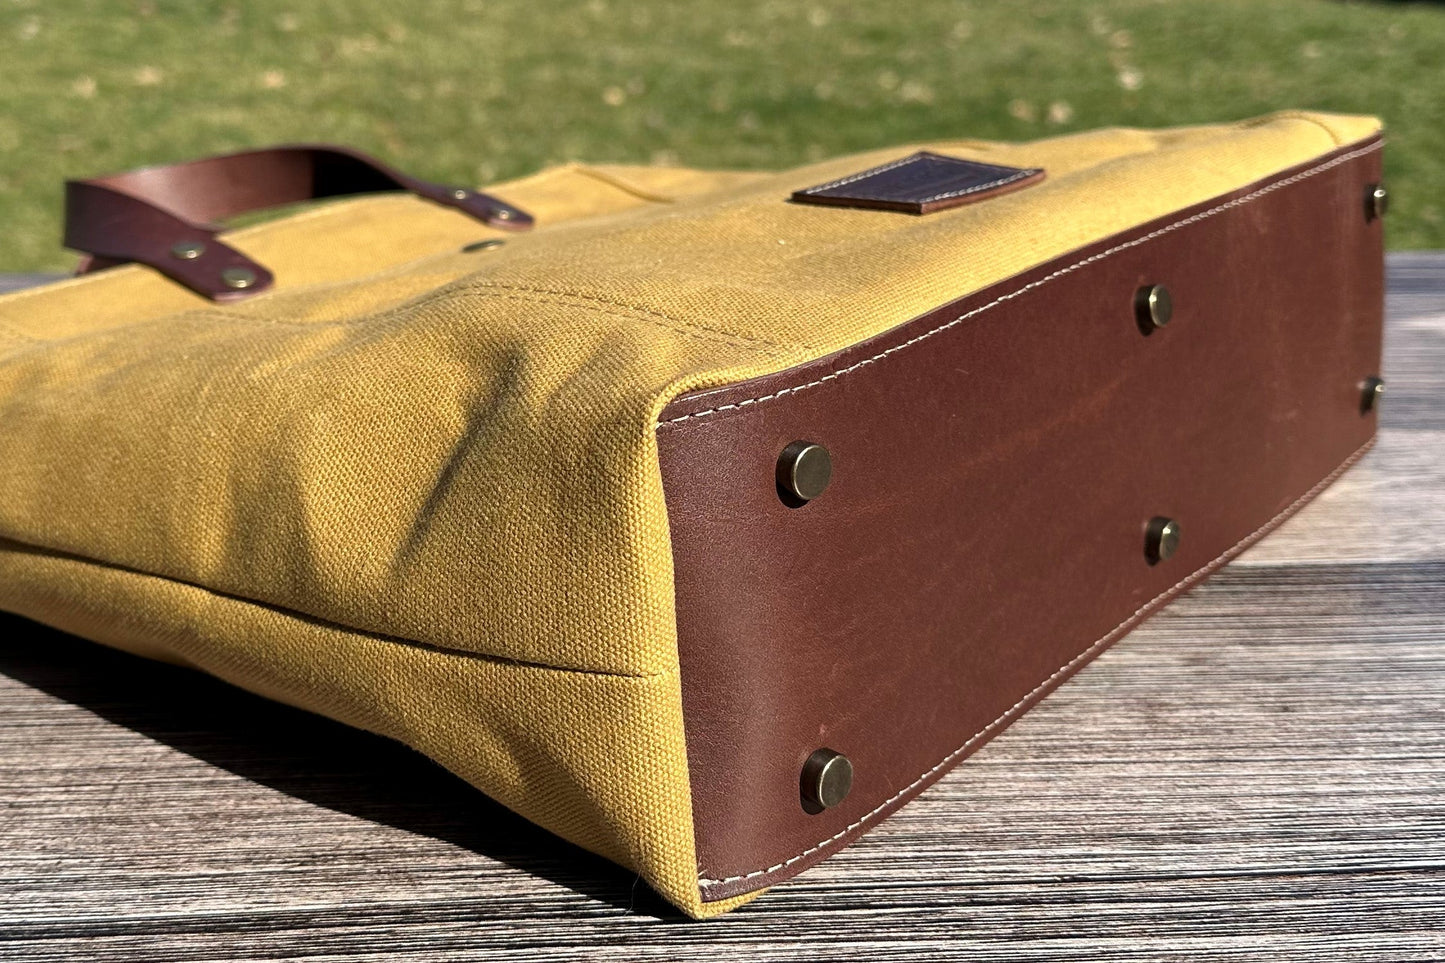 Sandstone Hybrid Waxed Canvas Oxford Tote squirescanvascreations